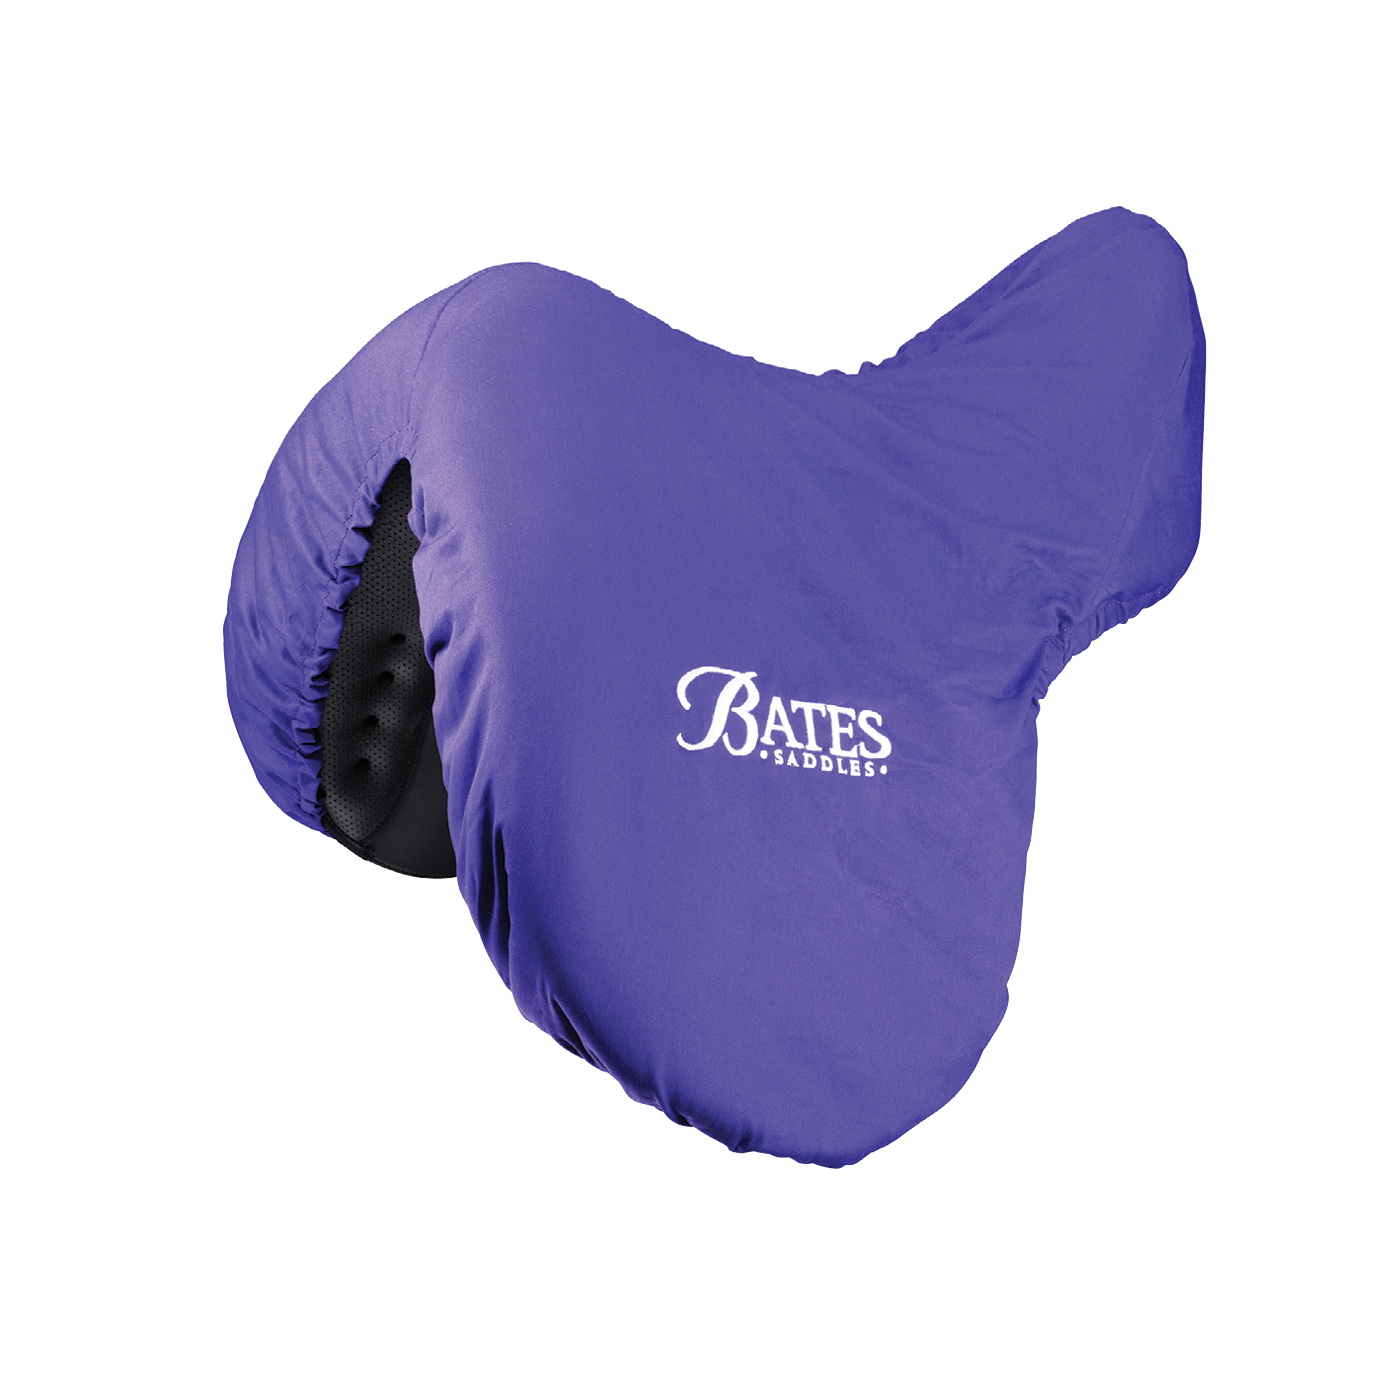 Bates Deluxe Saddle Cover - 619:32632446779476